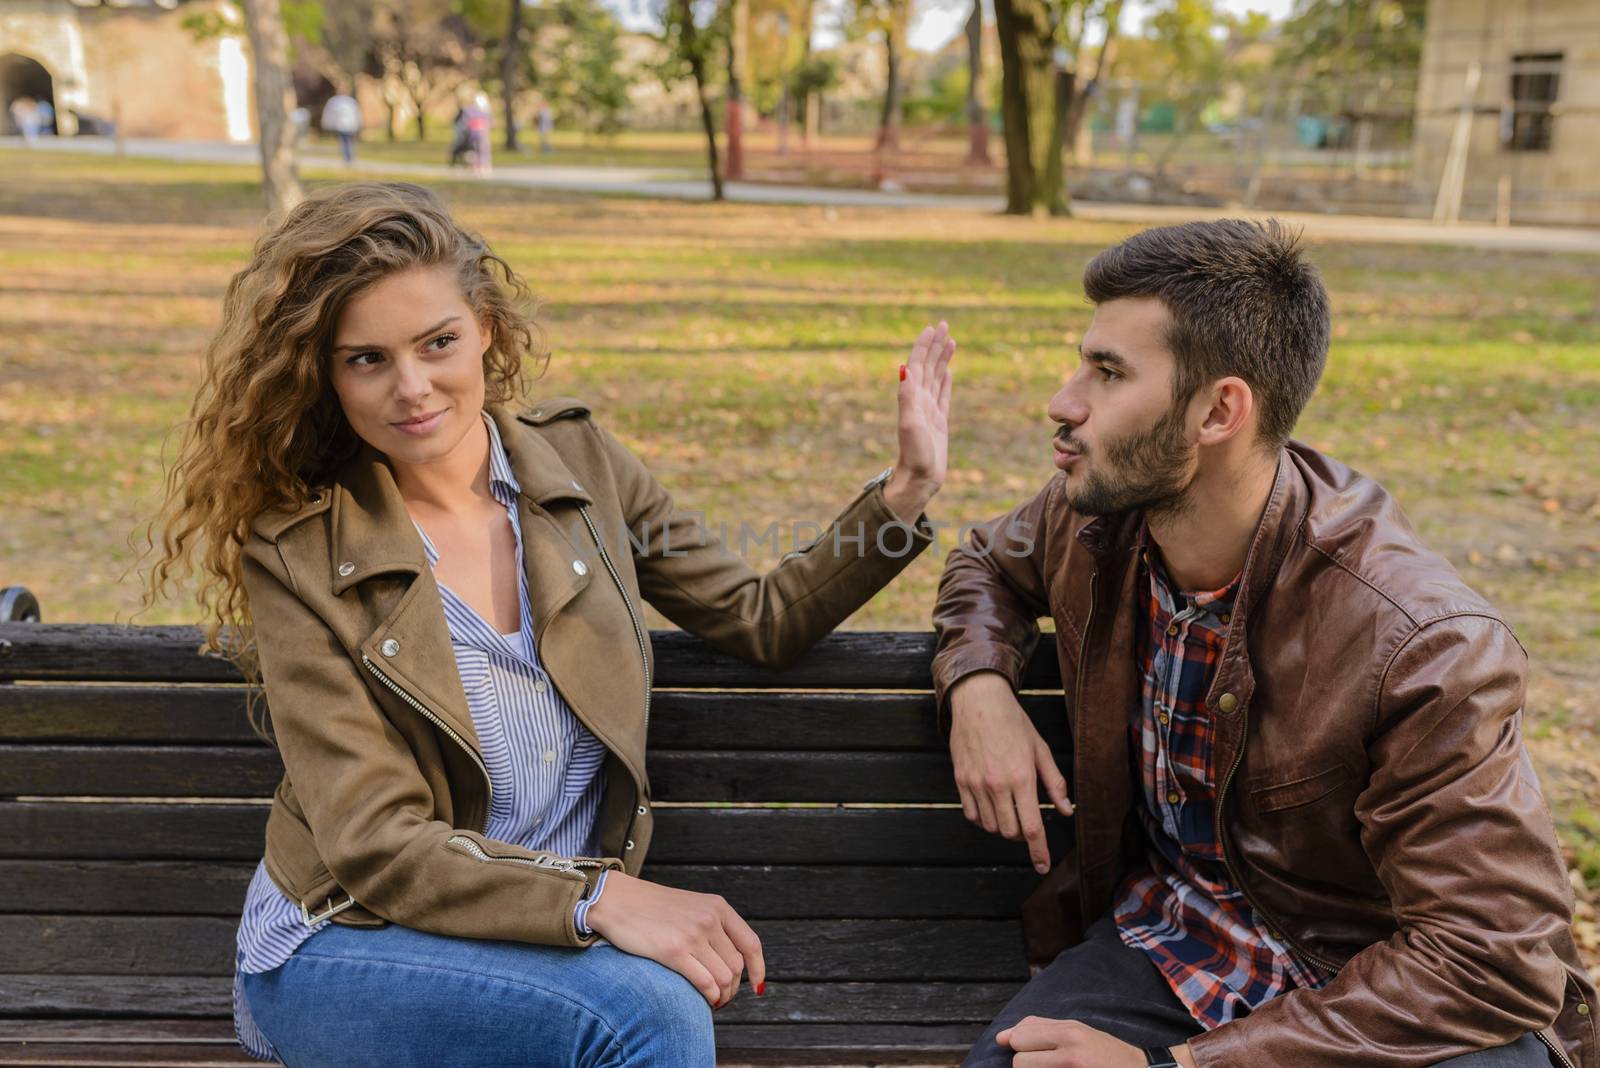 Young man and woman angry and conflicting on a park bench